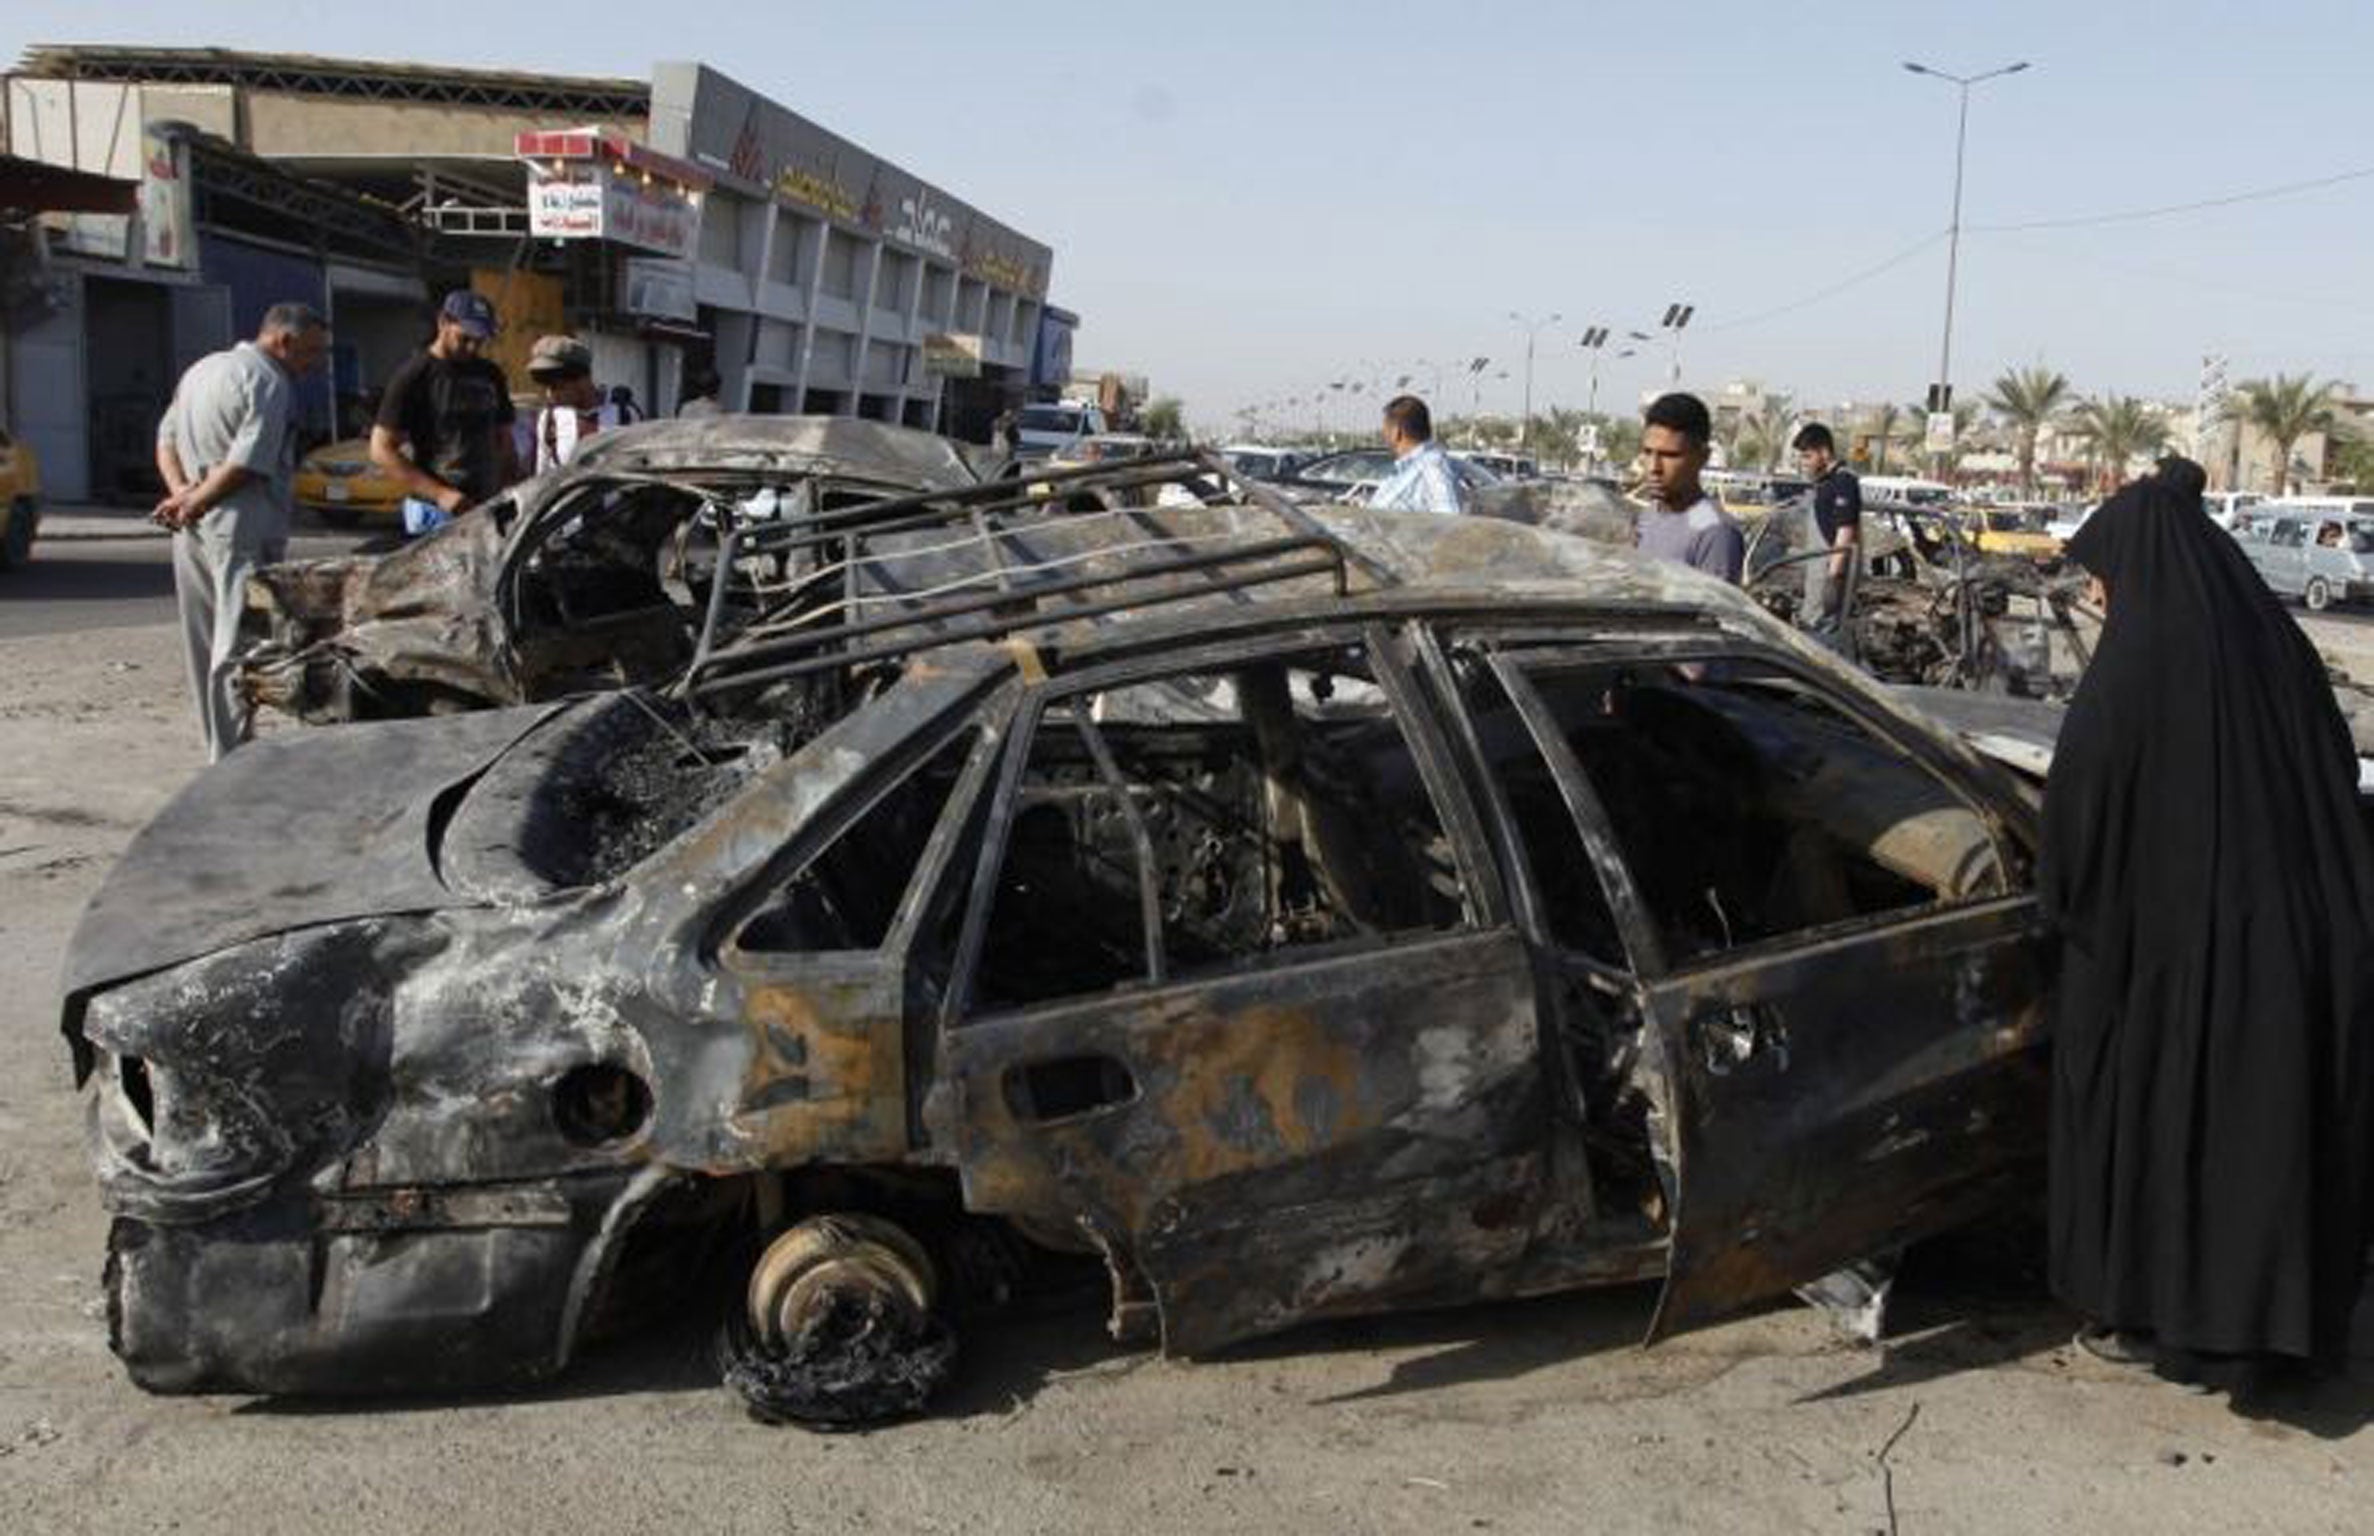 A woman looks over the remains of a car after 45 were killed in Baghdad in a series of car bomb attacks on Tuesday